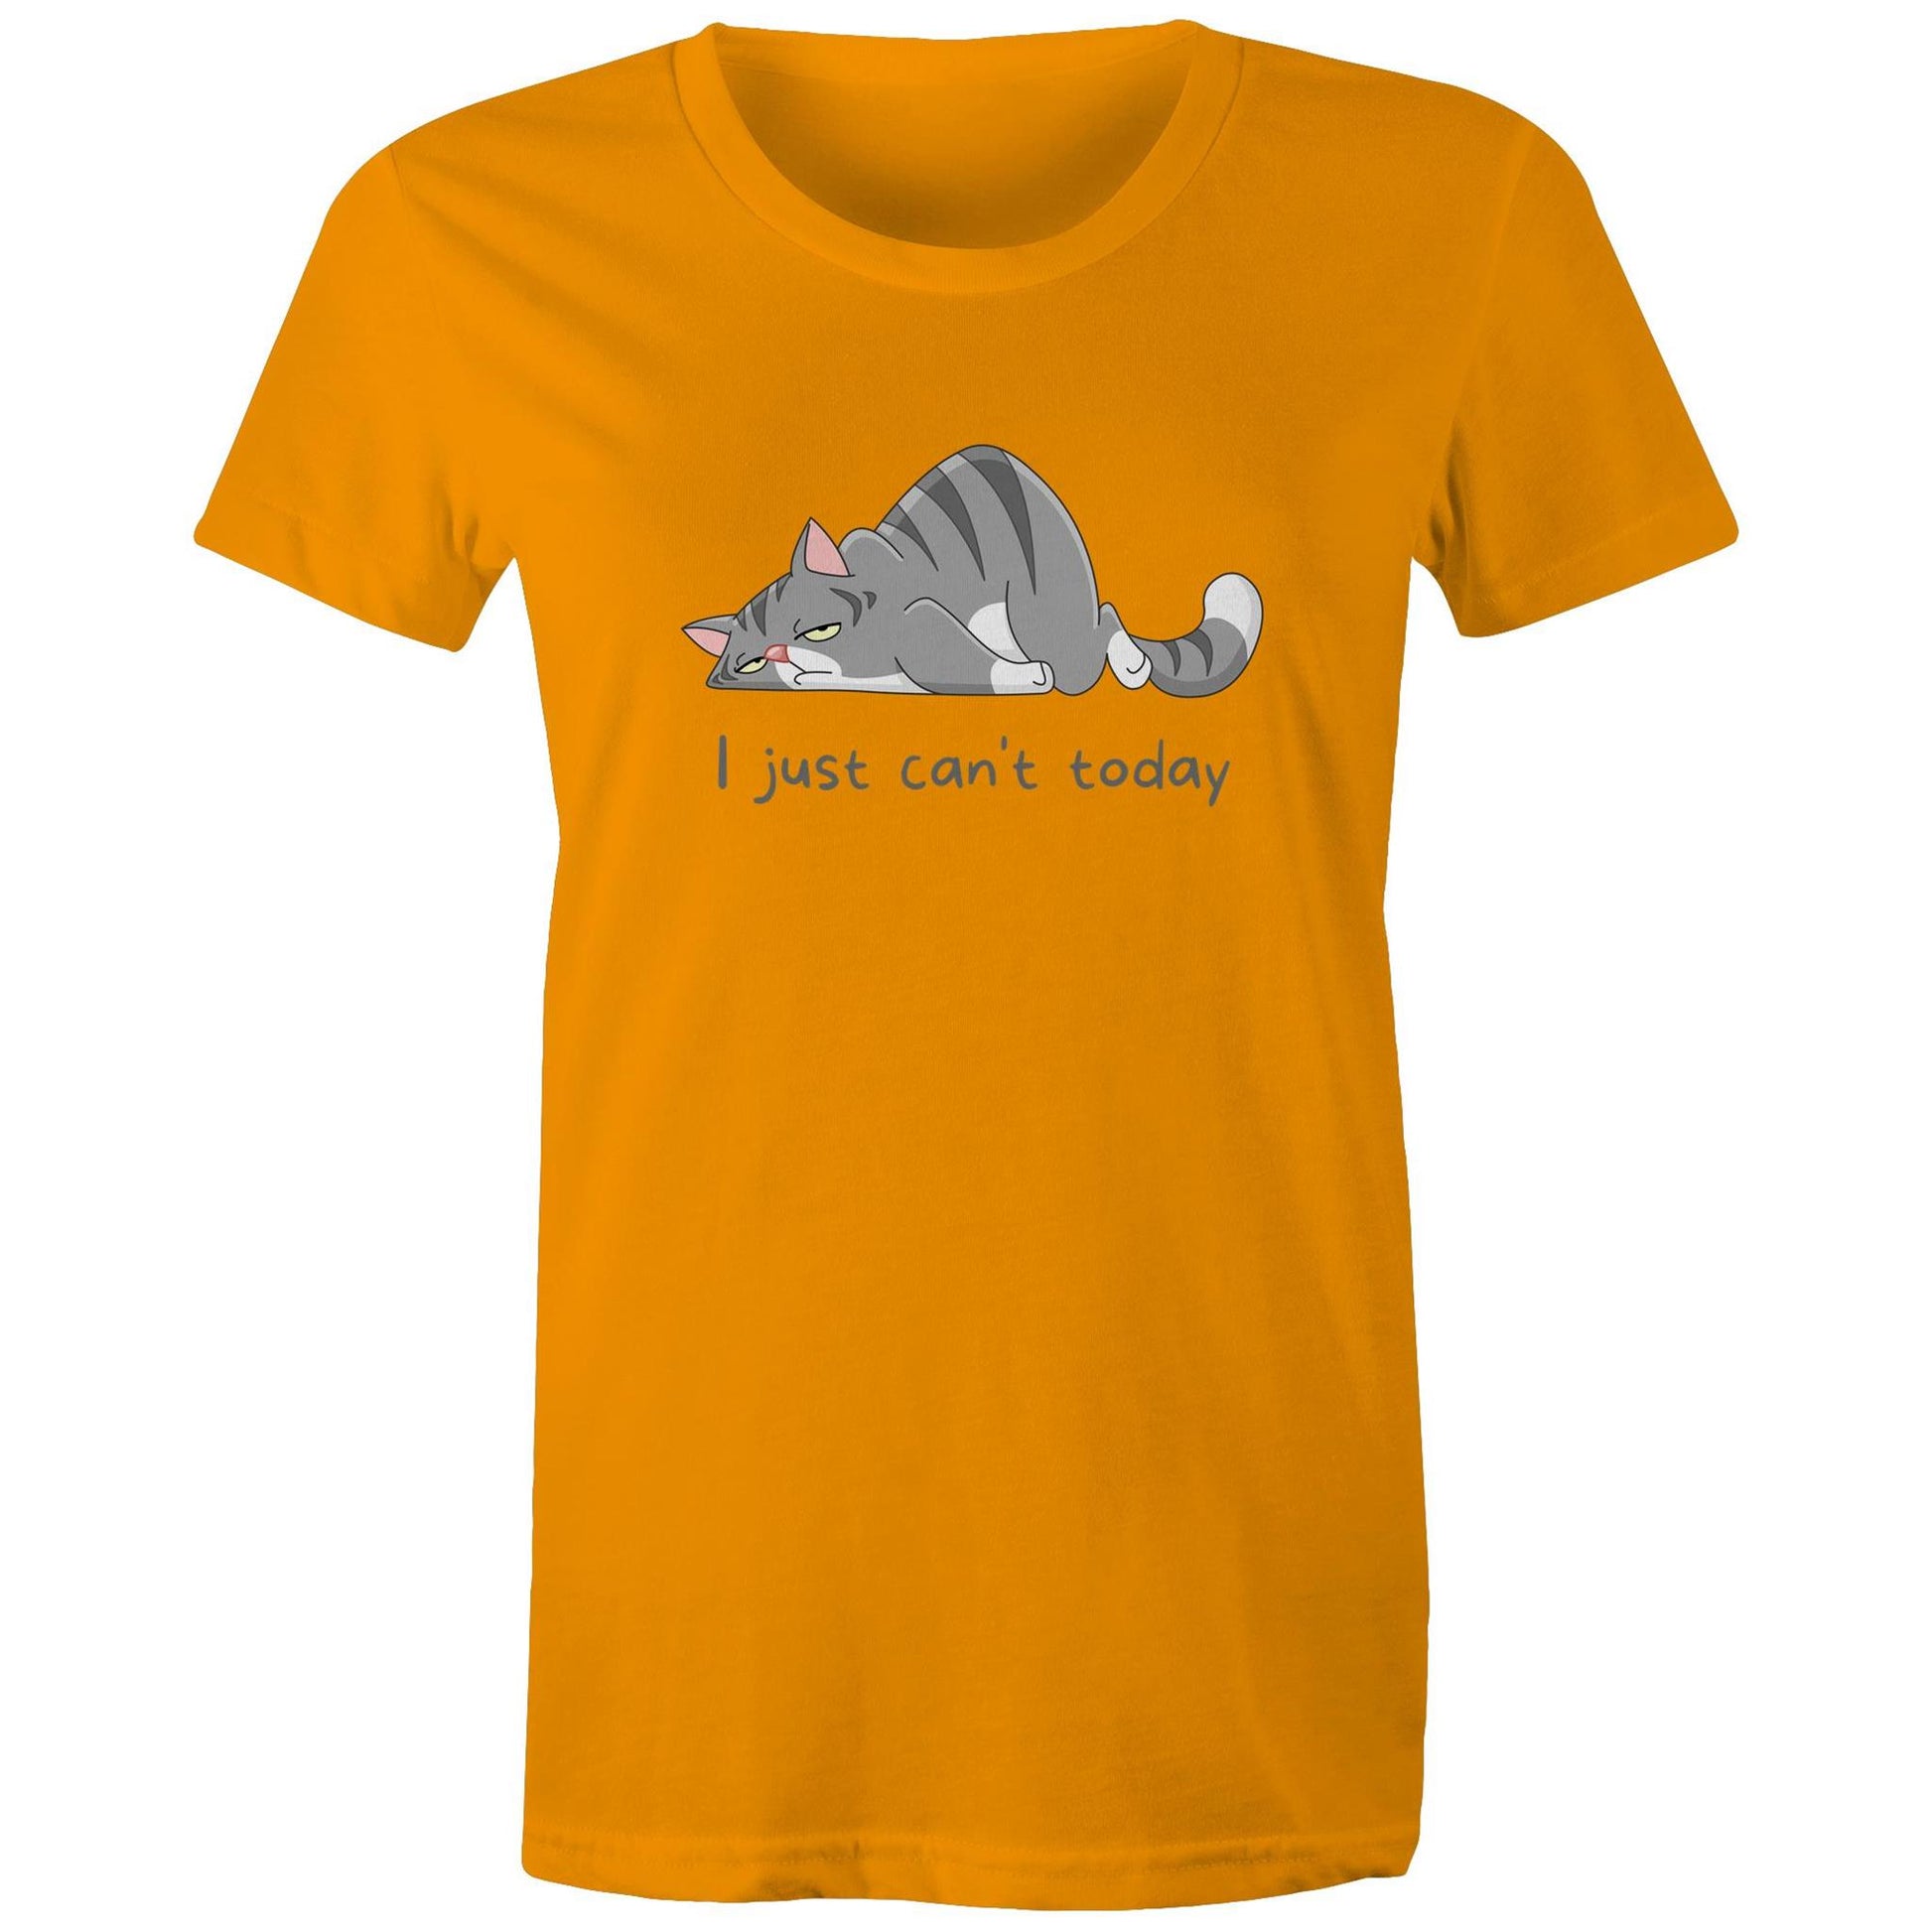 Cat, I Just Can't Today - Womens T-shirt Orange Womens T-shirt animal